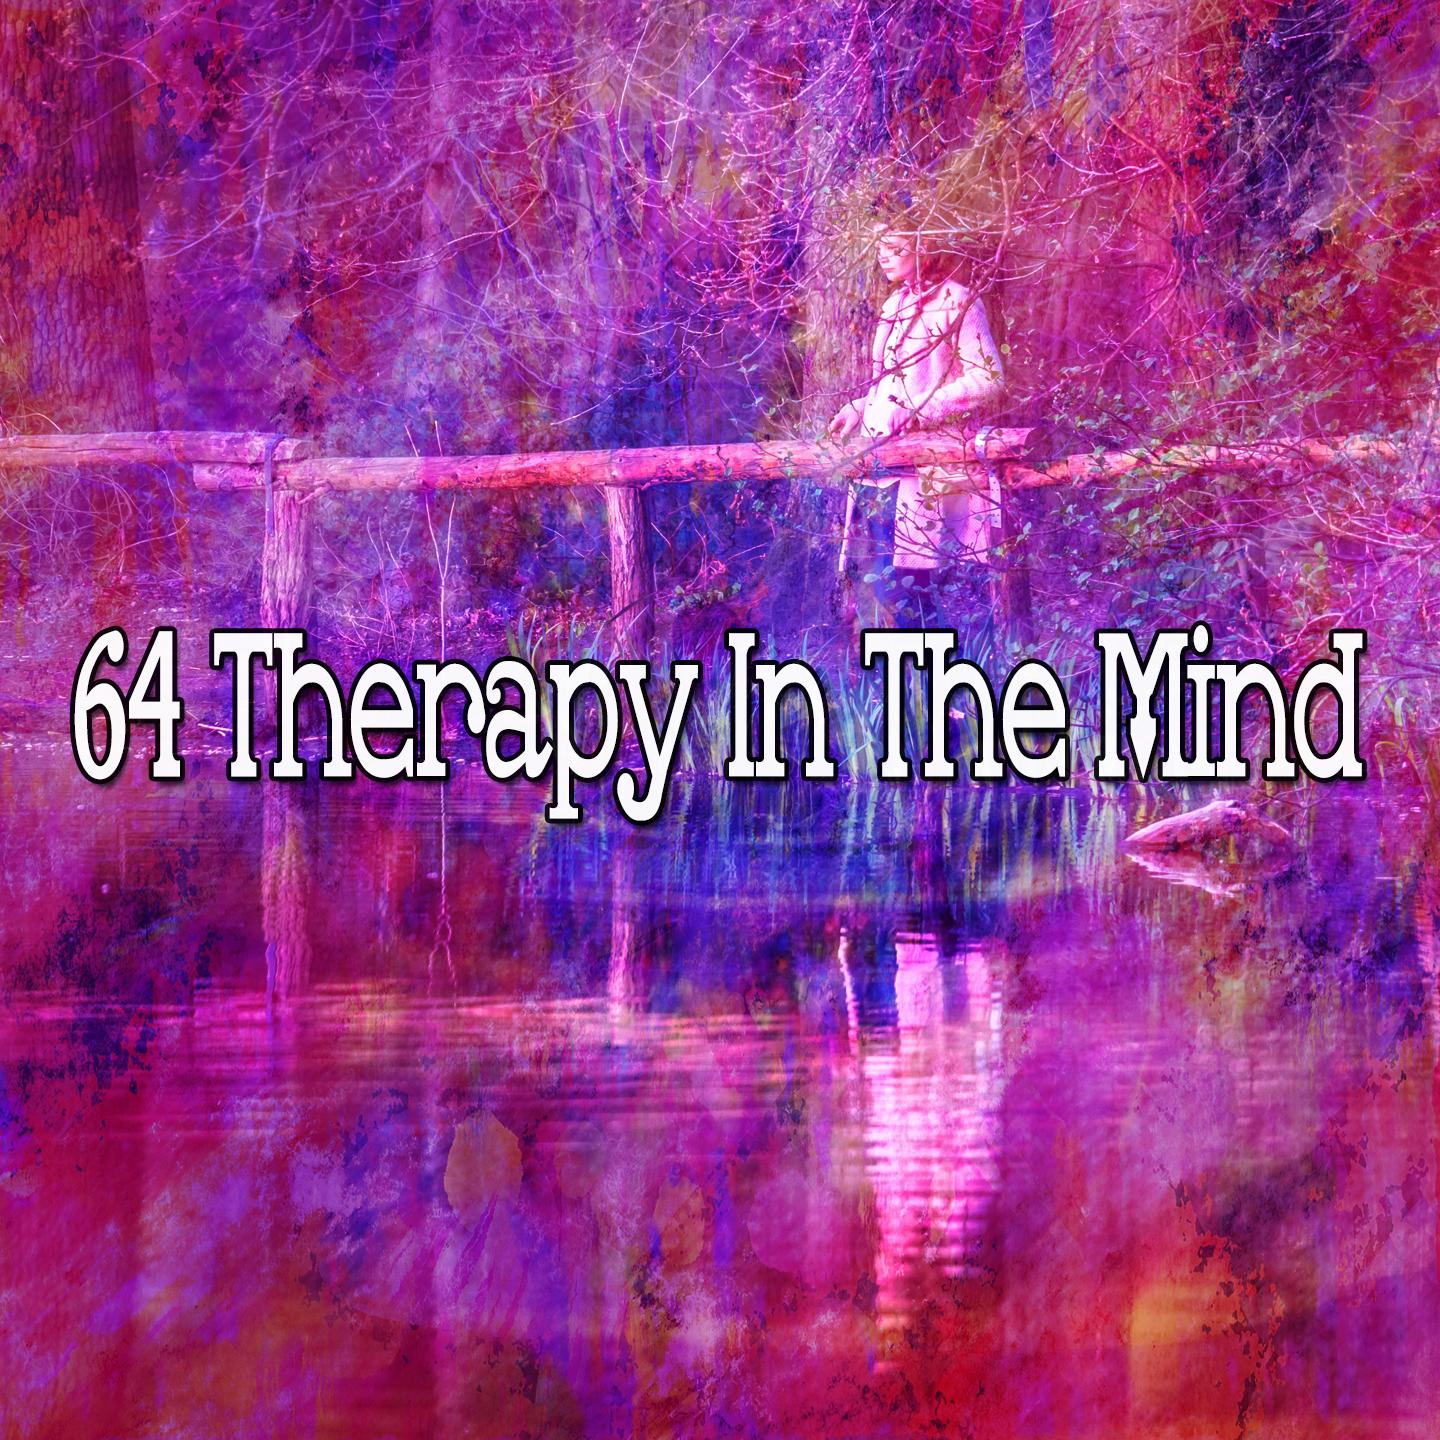 64 Therapy in the Mind